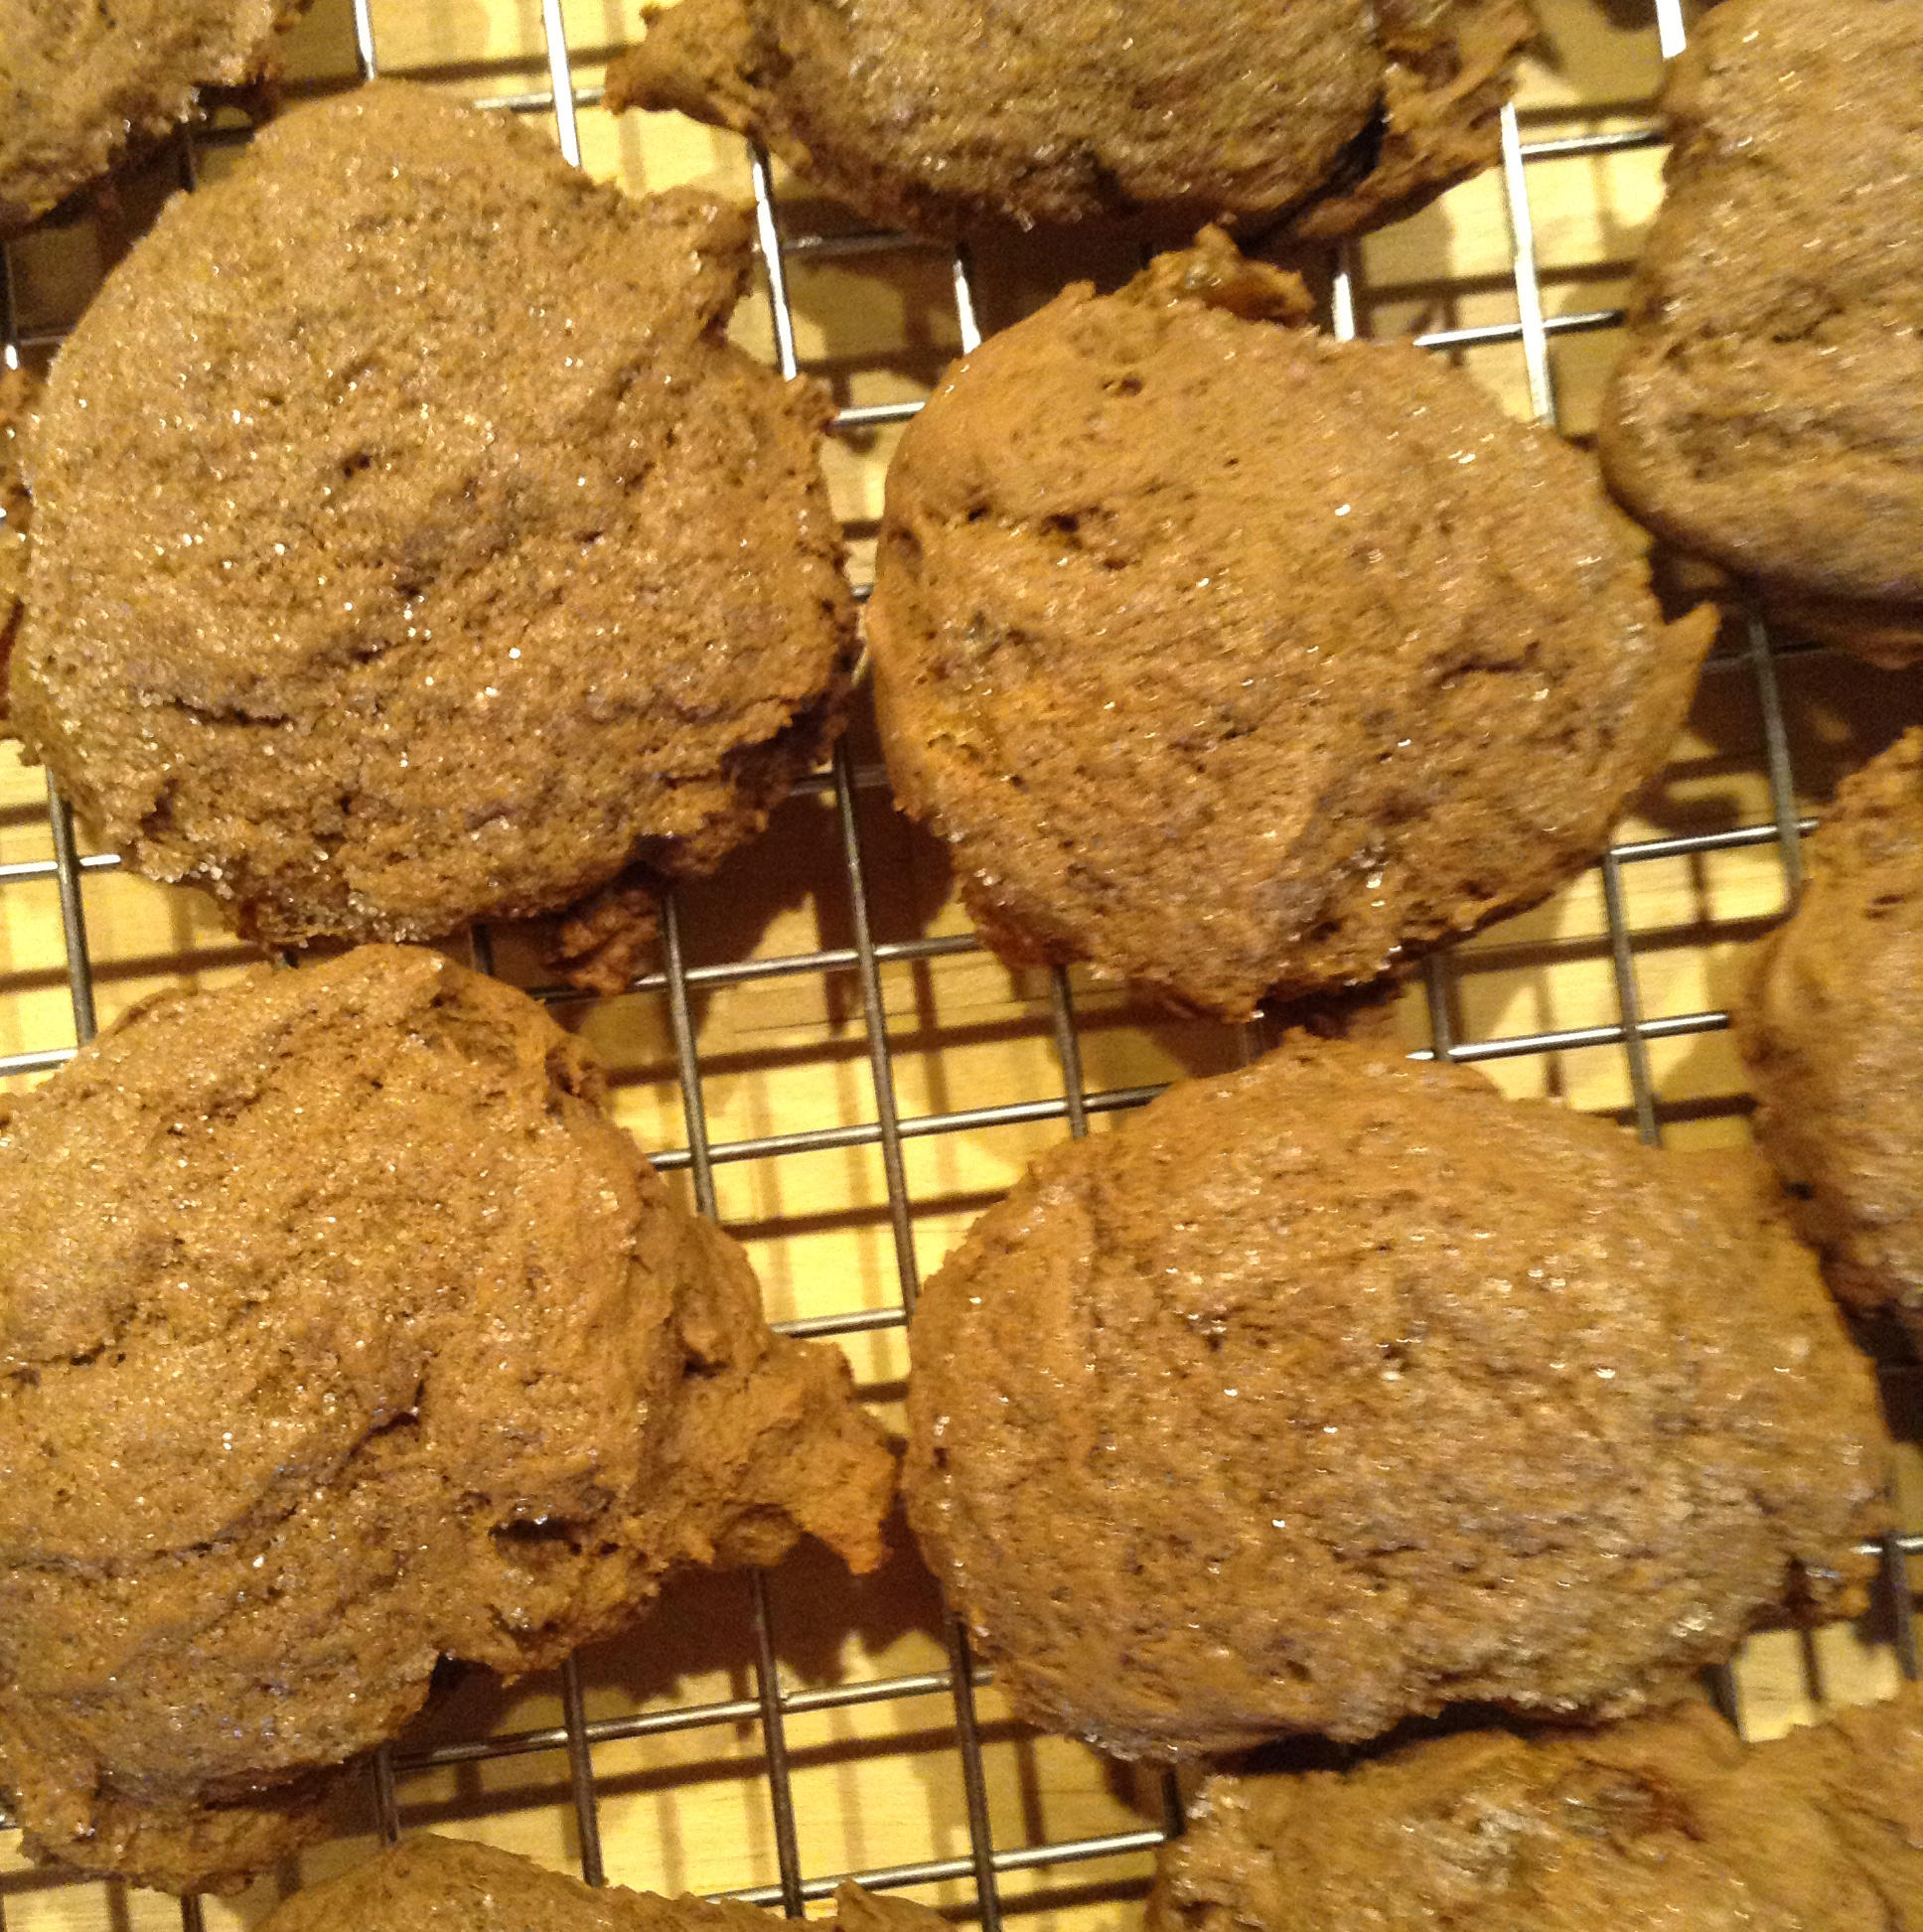 Chocolate Spice Cookies